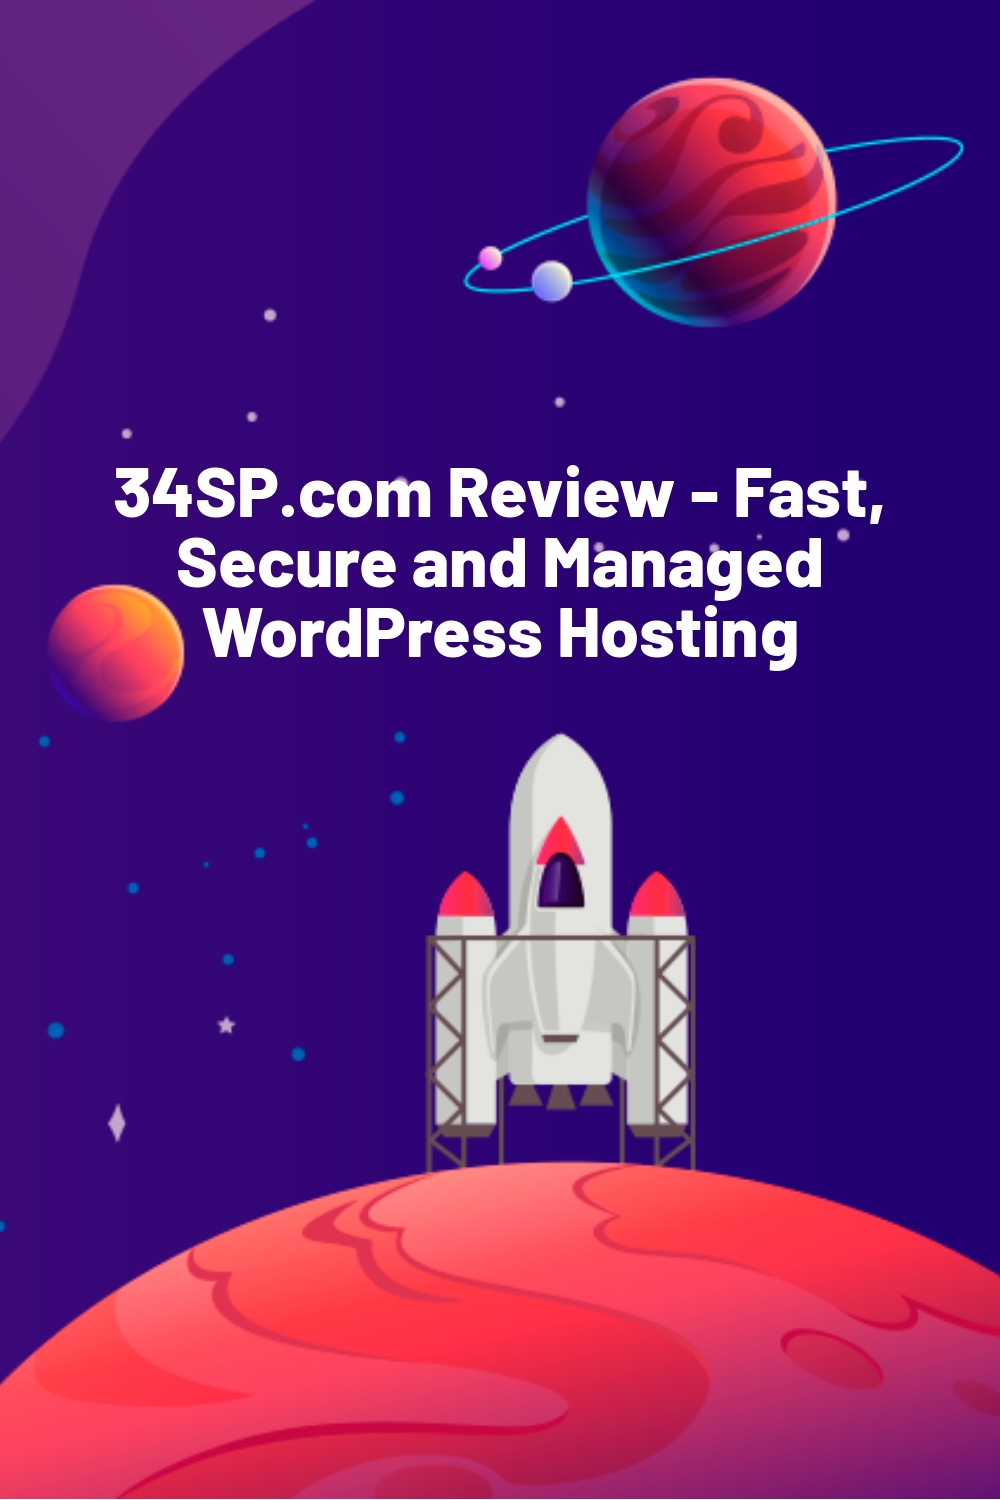 34SP.com Review – Fast, Secure and Managed WordPress Hosting